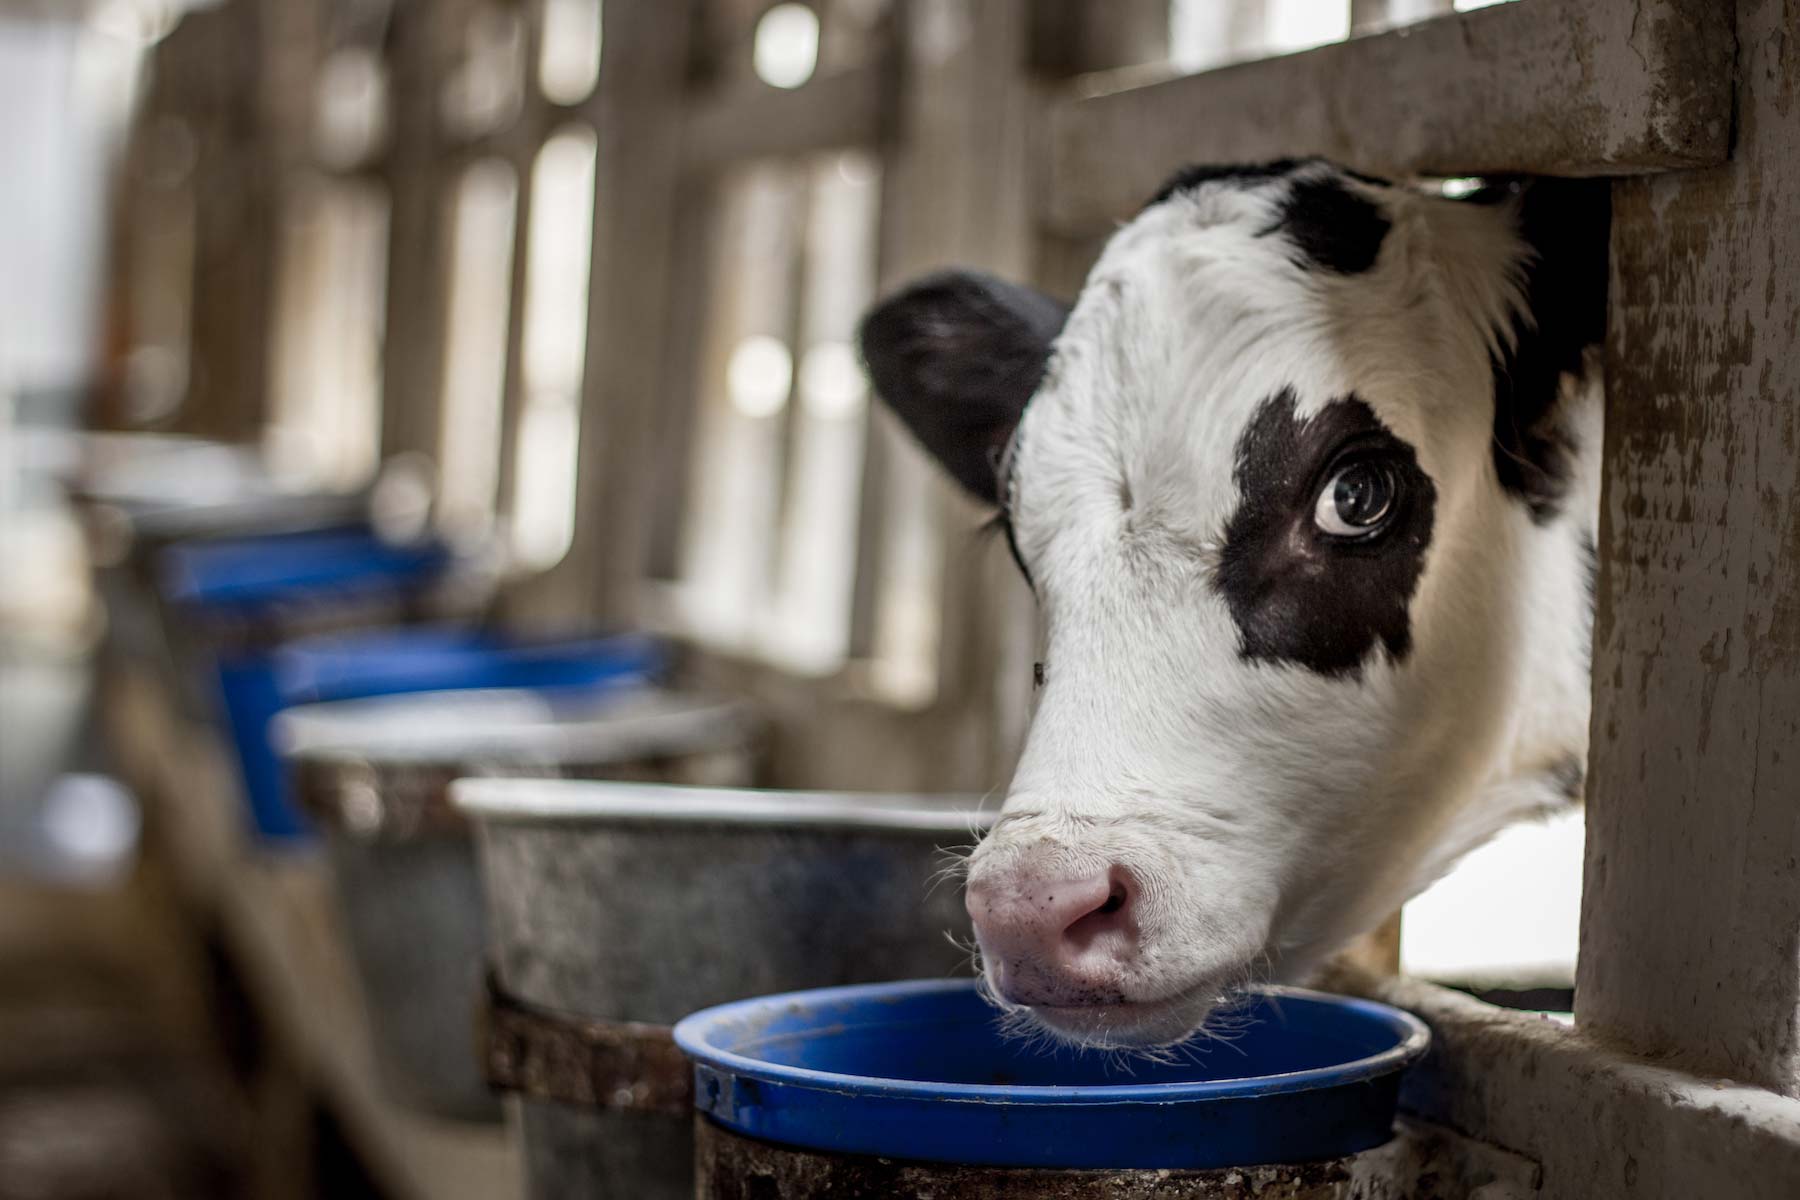 A calf sticks her head out of her stall to drink milk from a bucket at a dairy farm